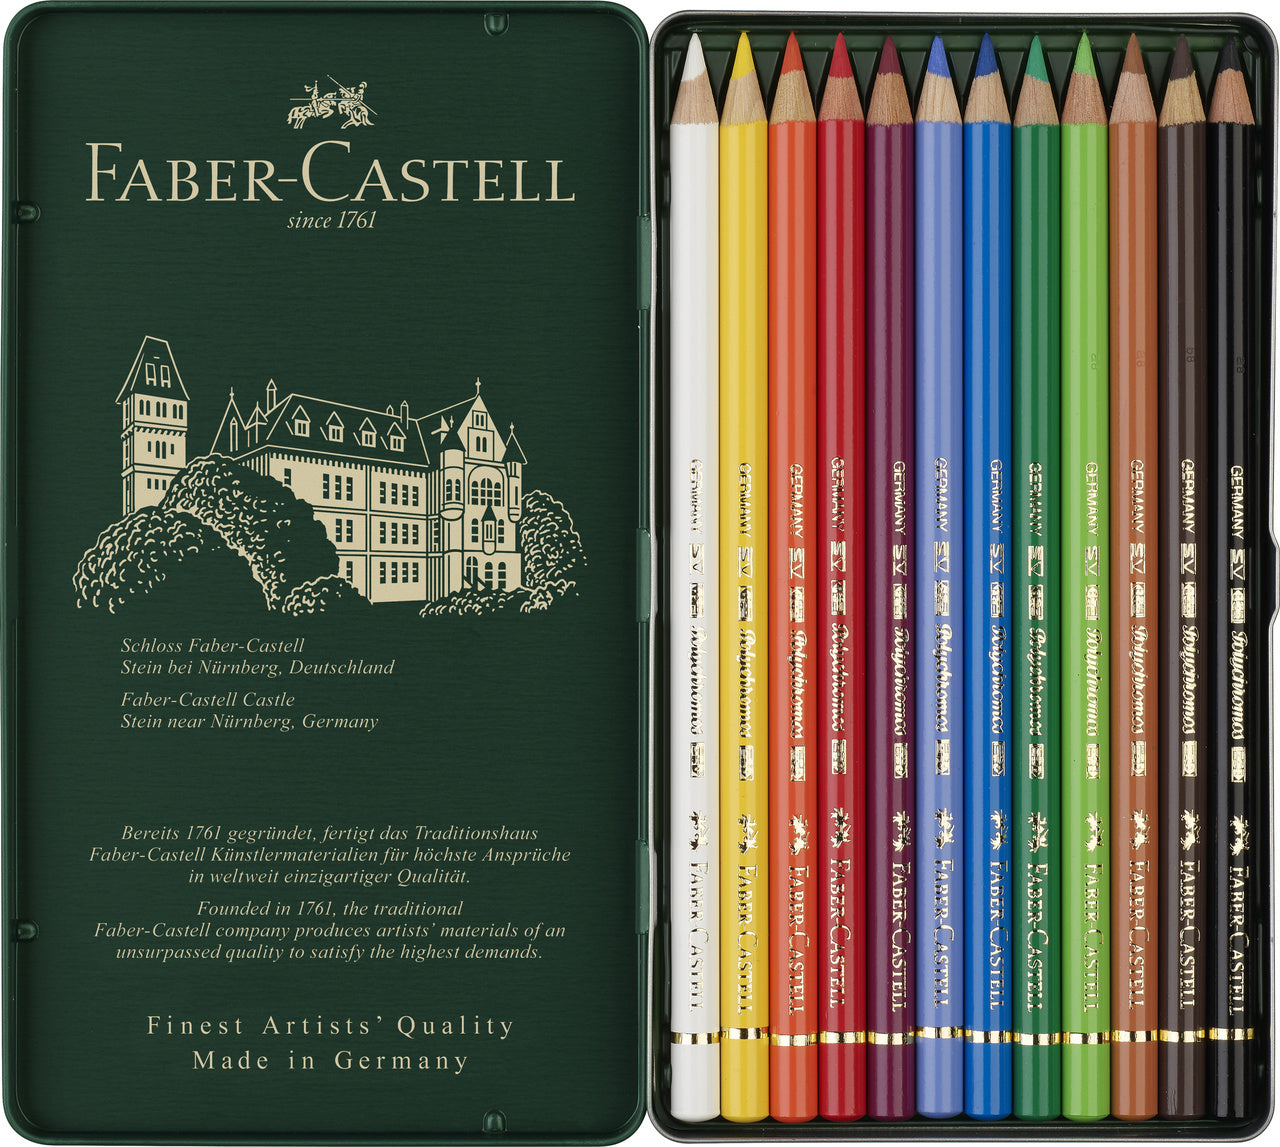 Faber-Castell - Polychromos Gift set + accessories